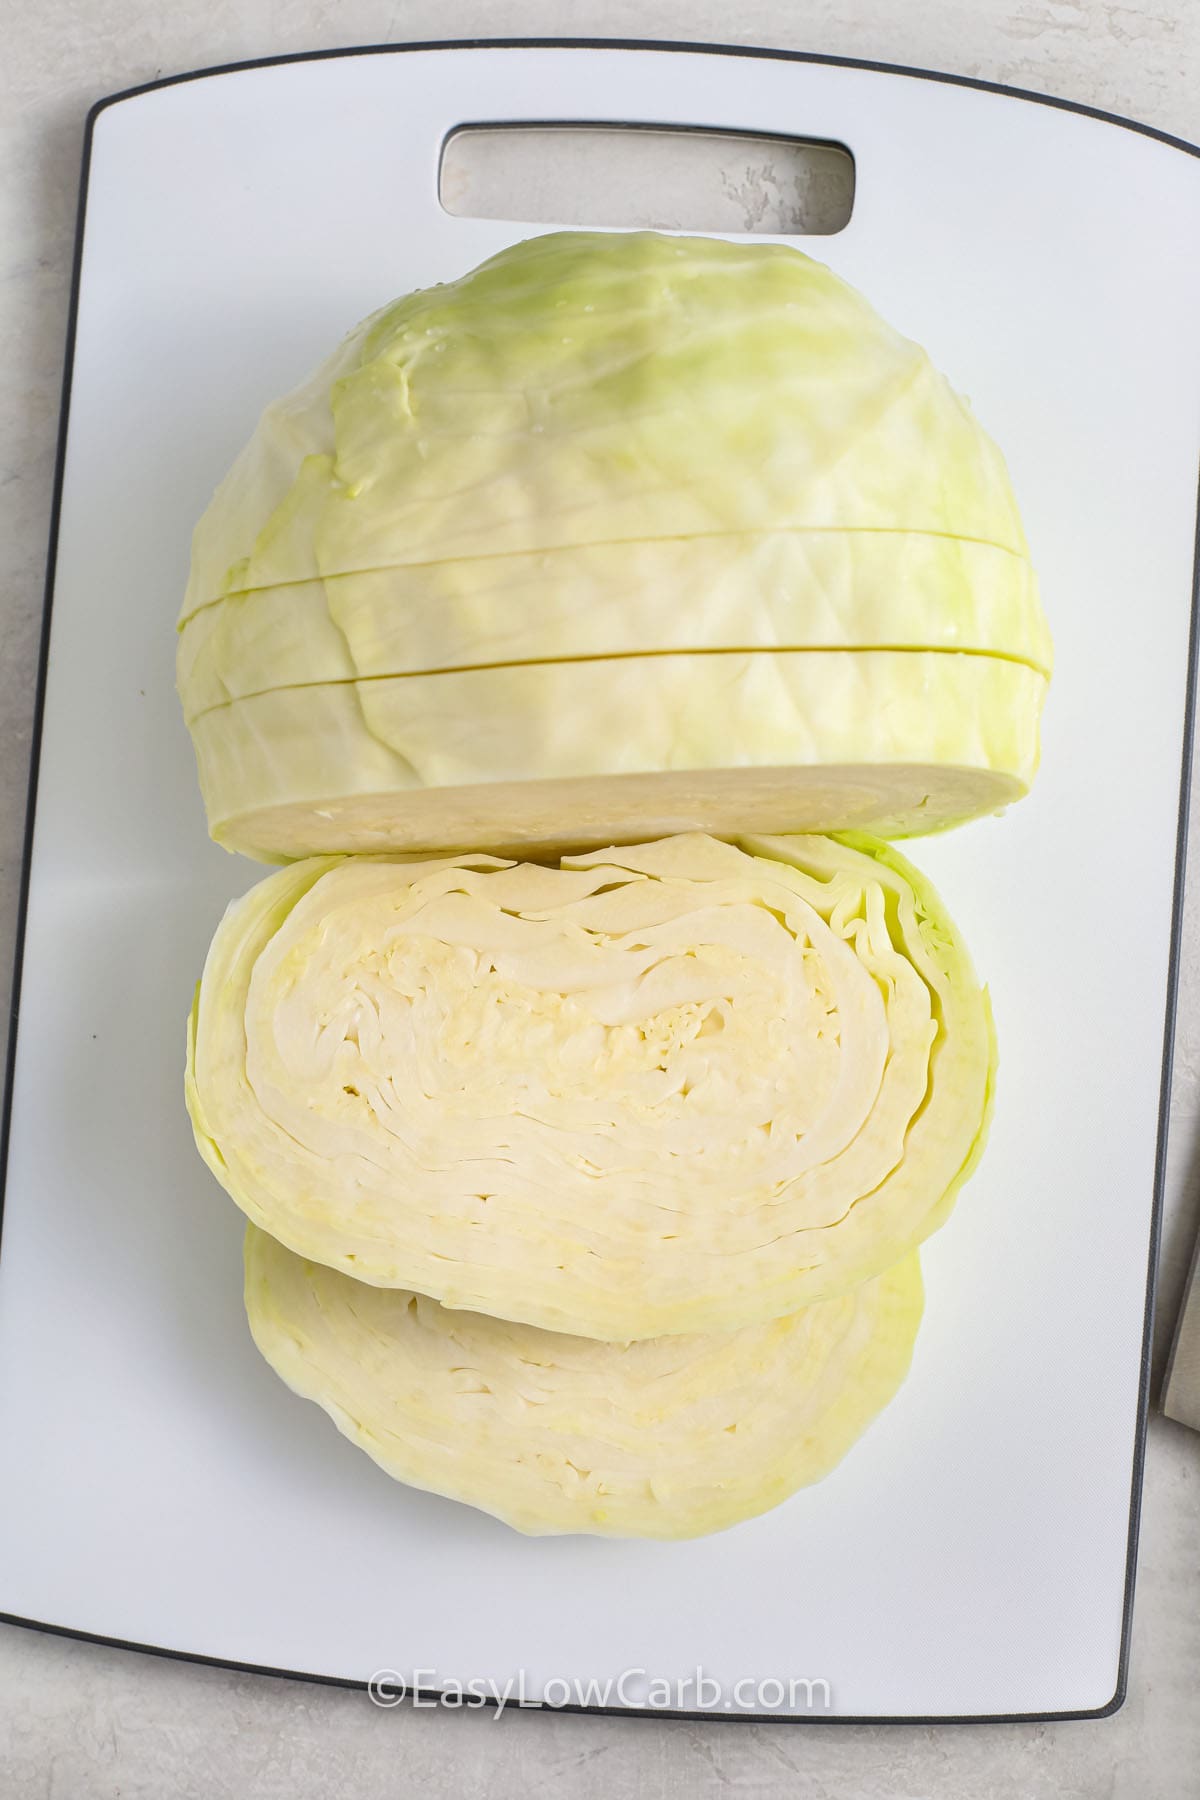 A head of cabbage being cut into slices